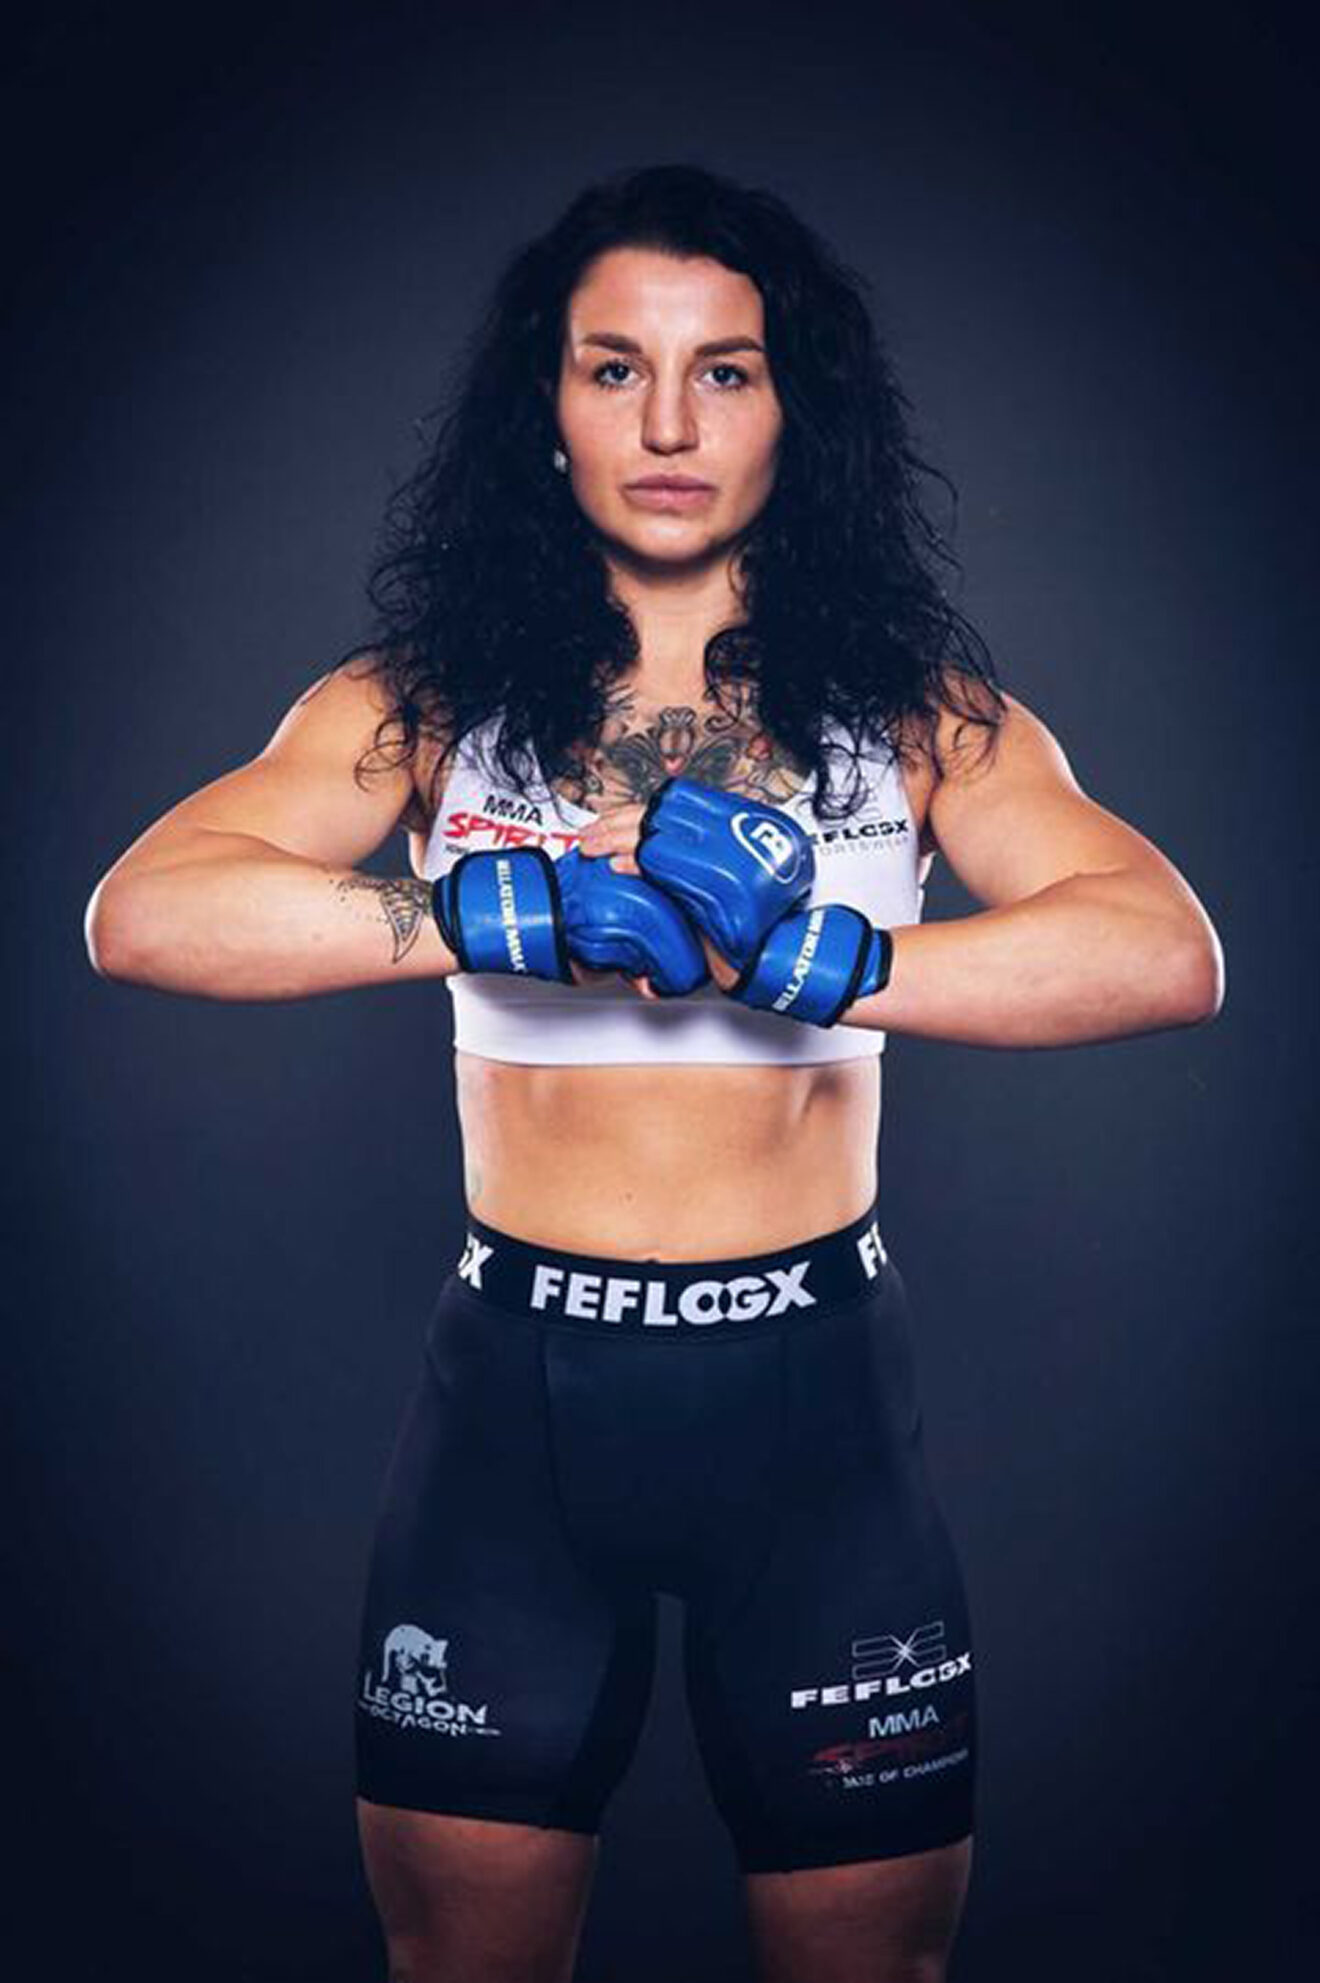 Top Female MMA Fighter Had Ruptured Implant For Over A Year Before